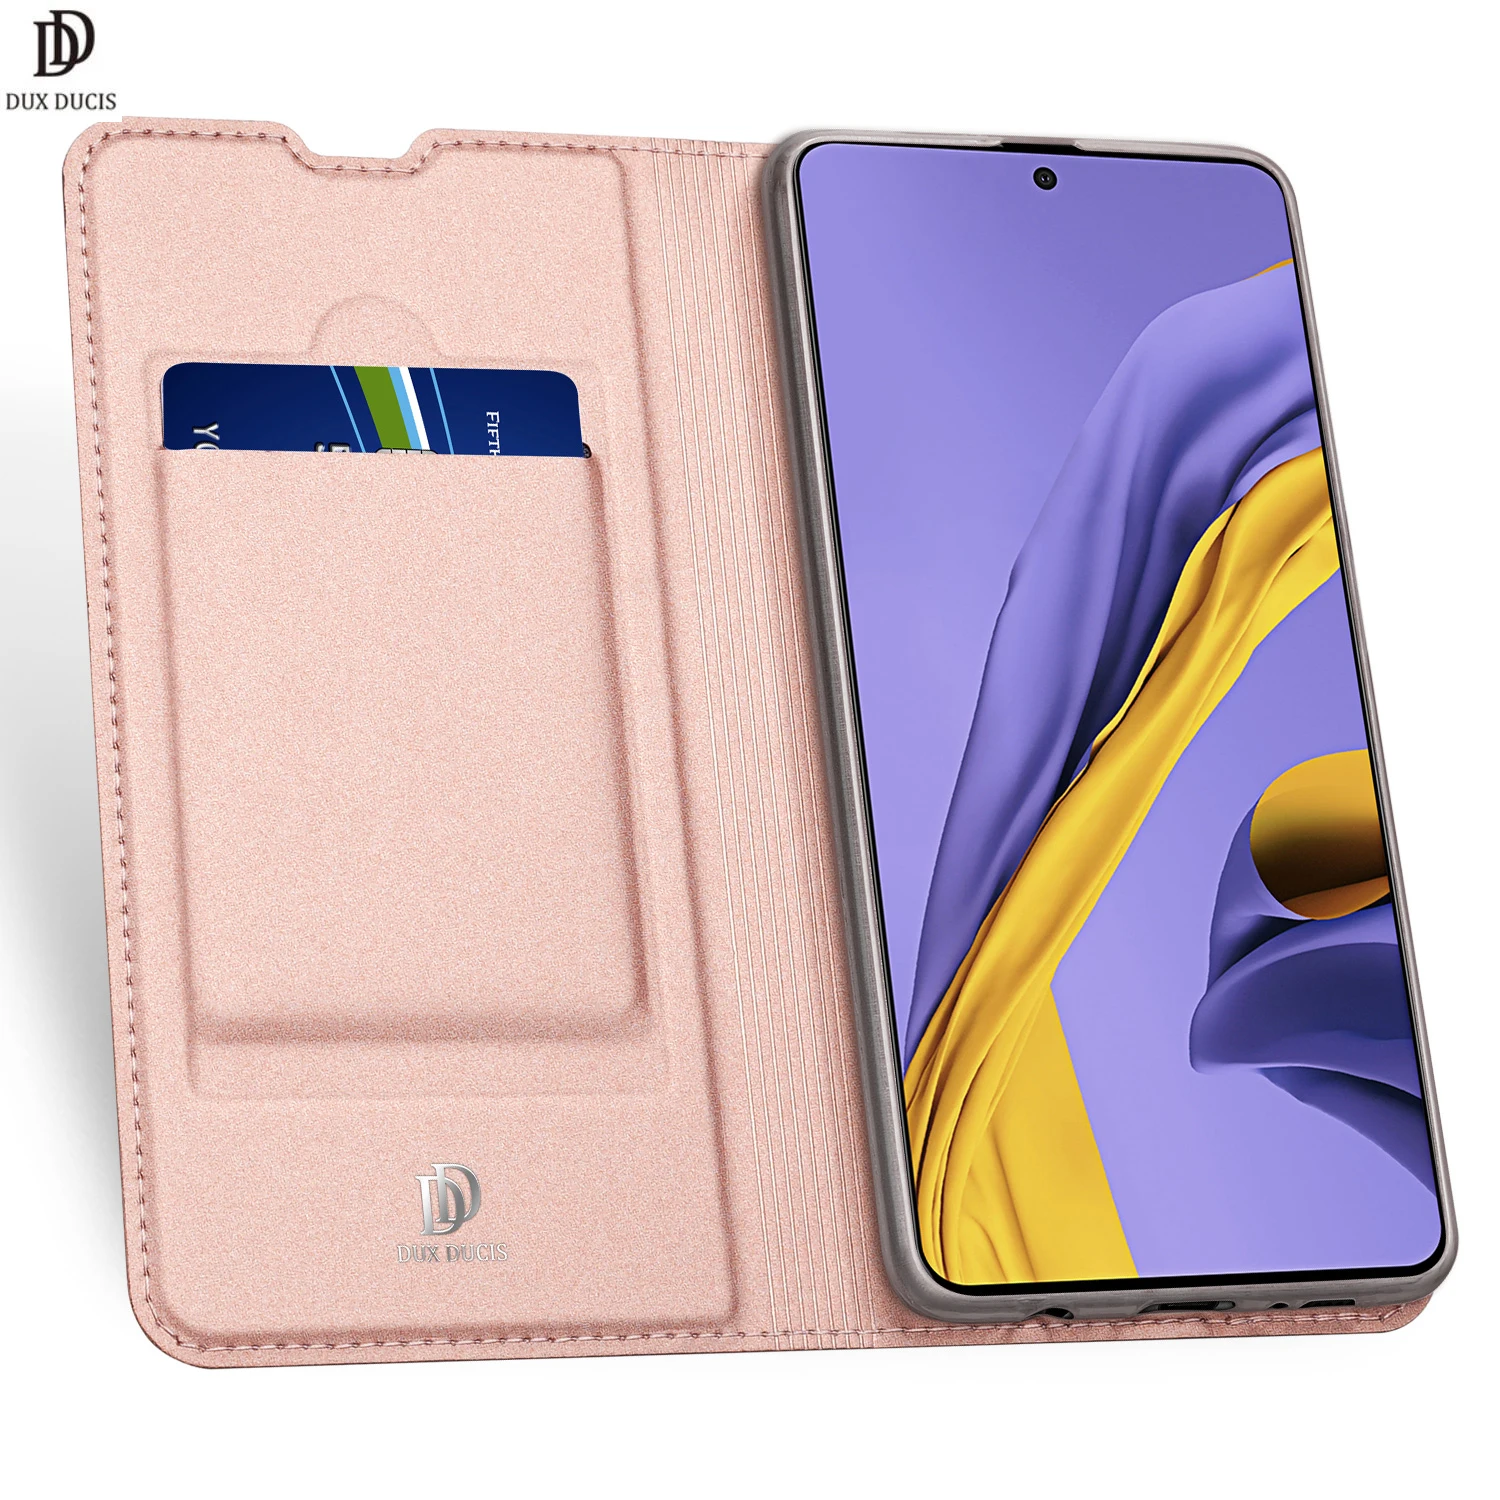 

For Samsung Galaxy A71 DUX DUCIS Skin Pro Series Leather Wallet Flip Case Full Protection Steady Stand Magnetic Closure